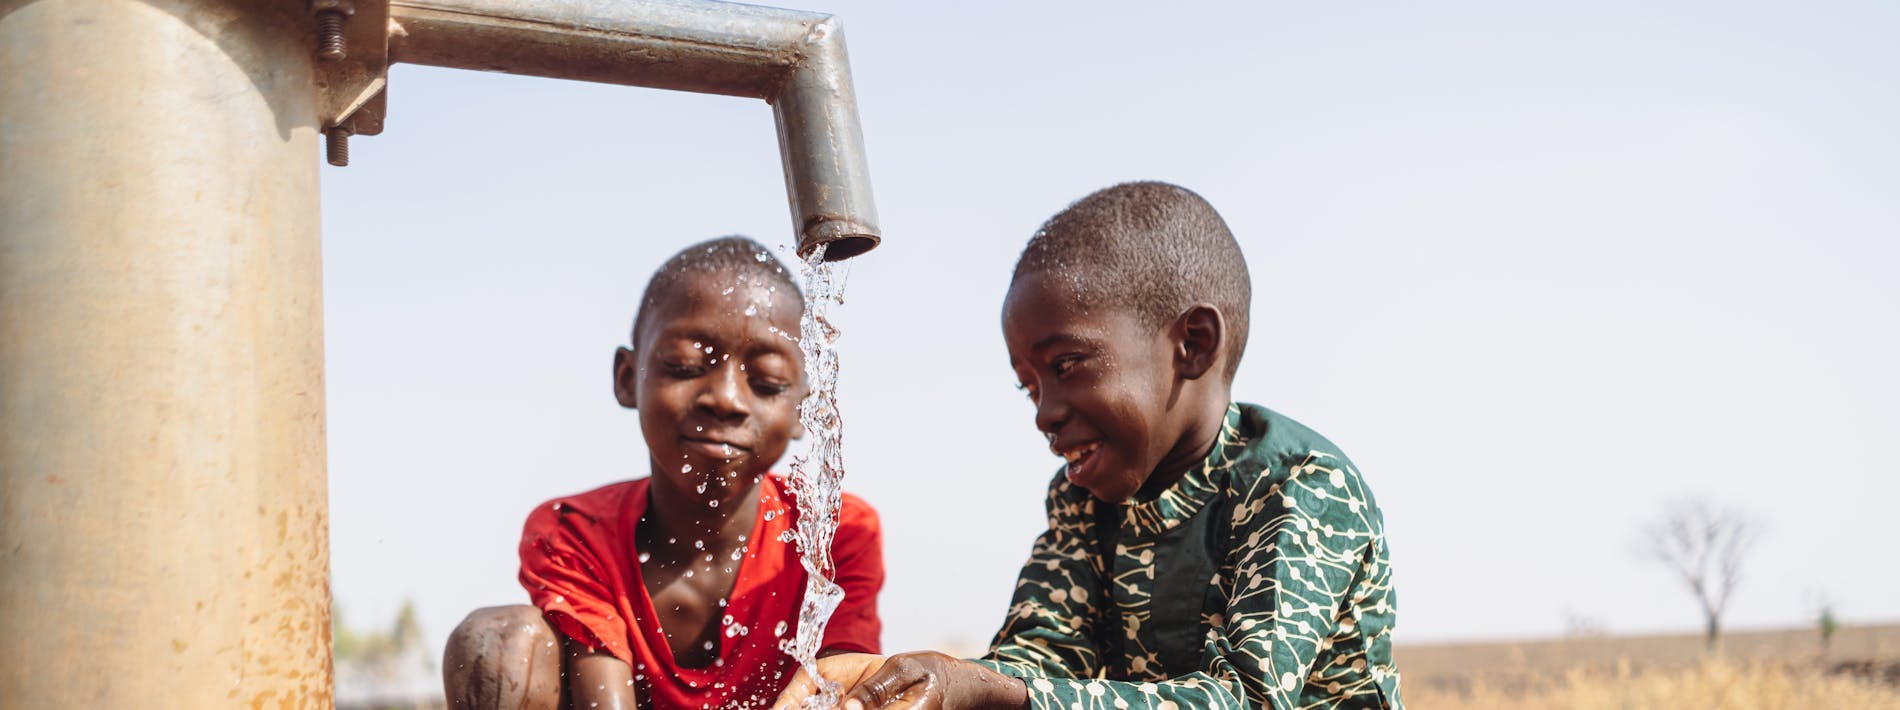 Guinea Worm Disease and Water Quality: How They’re Connected